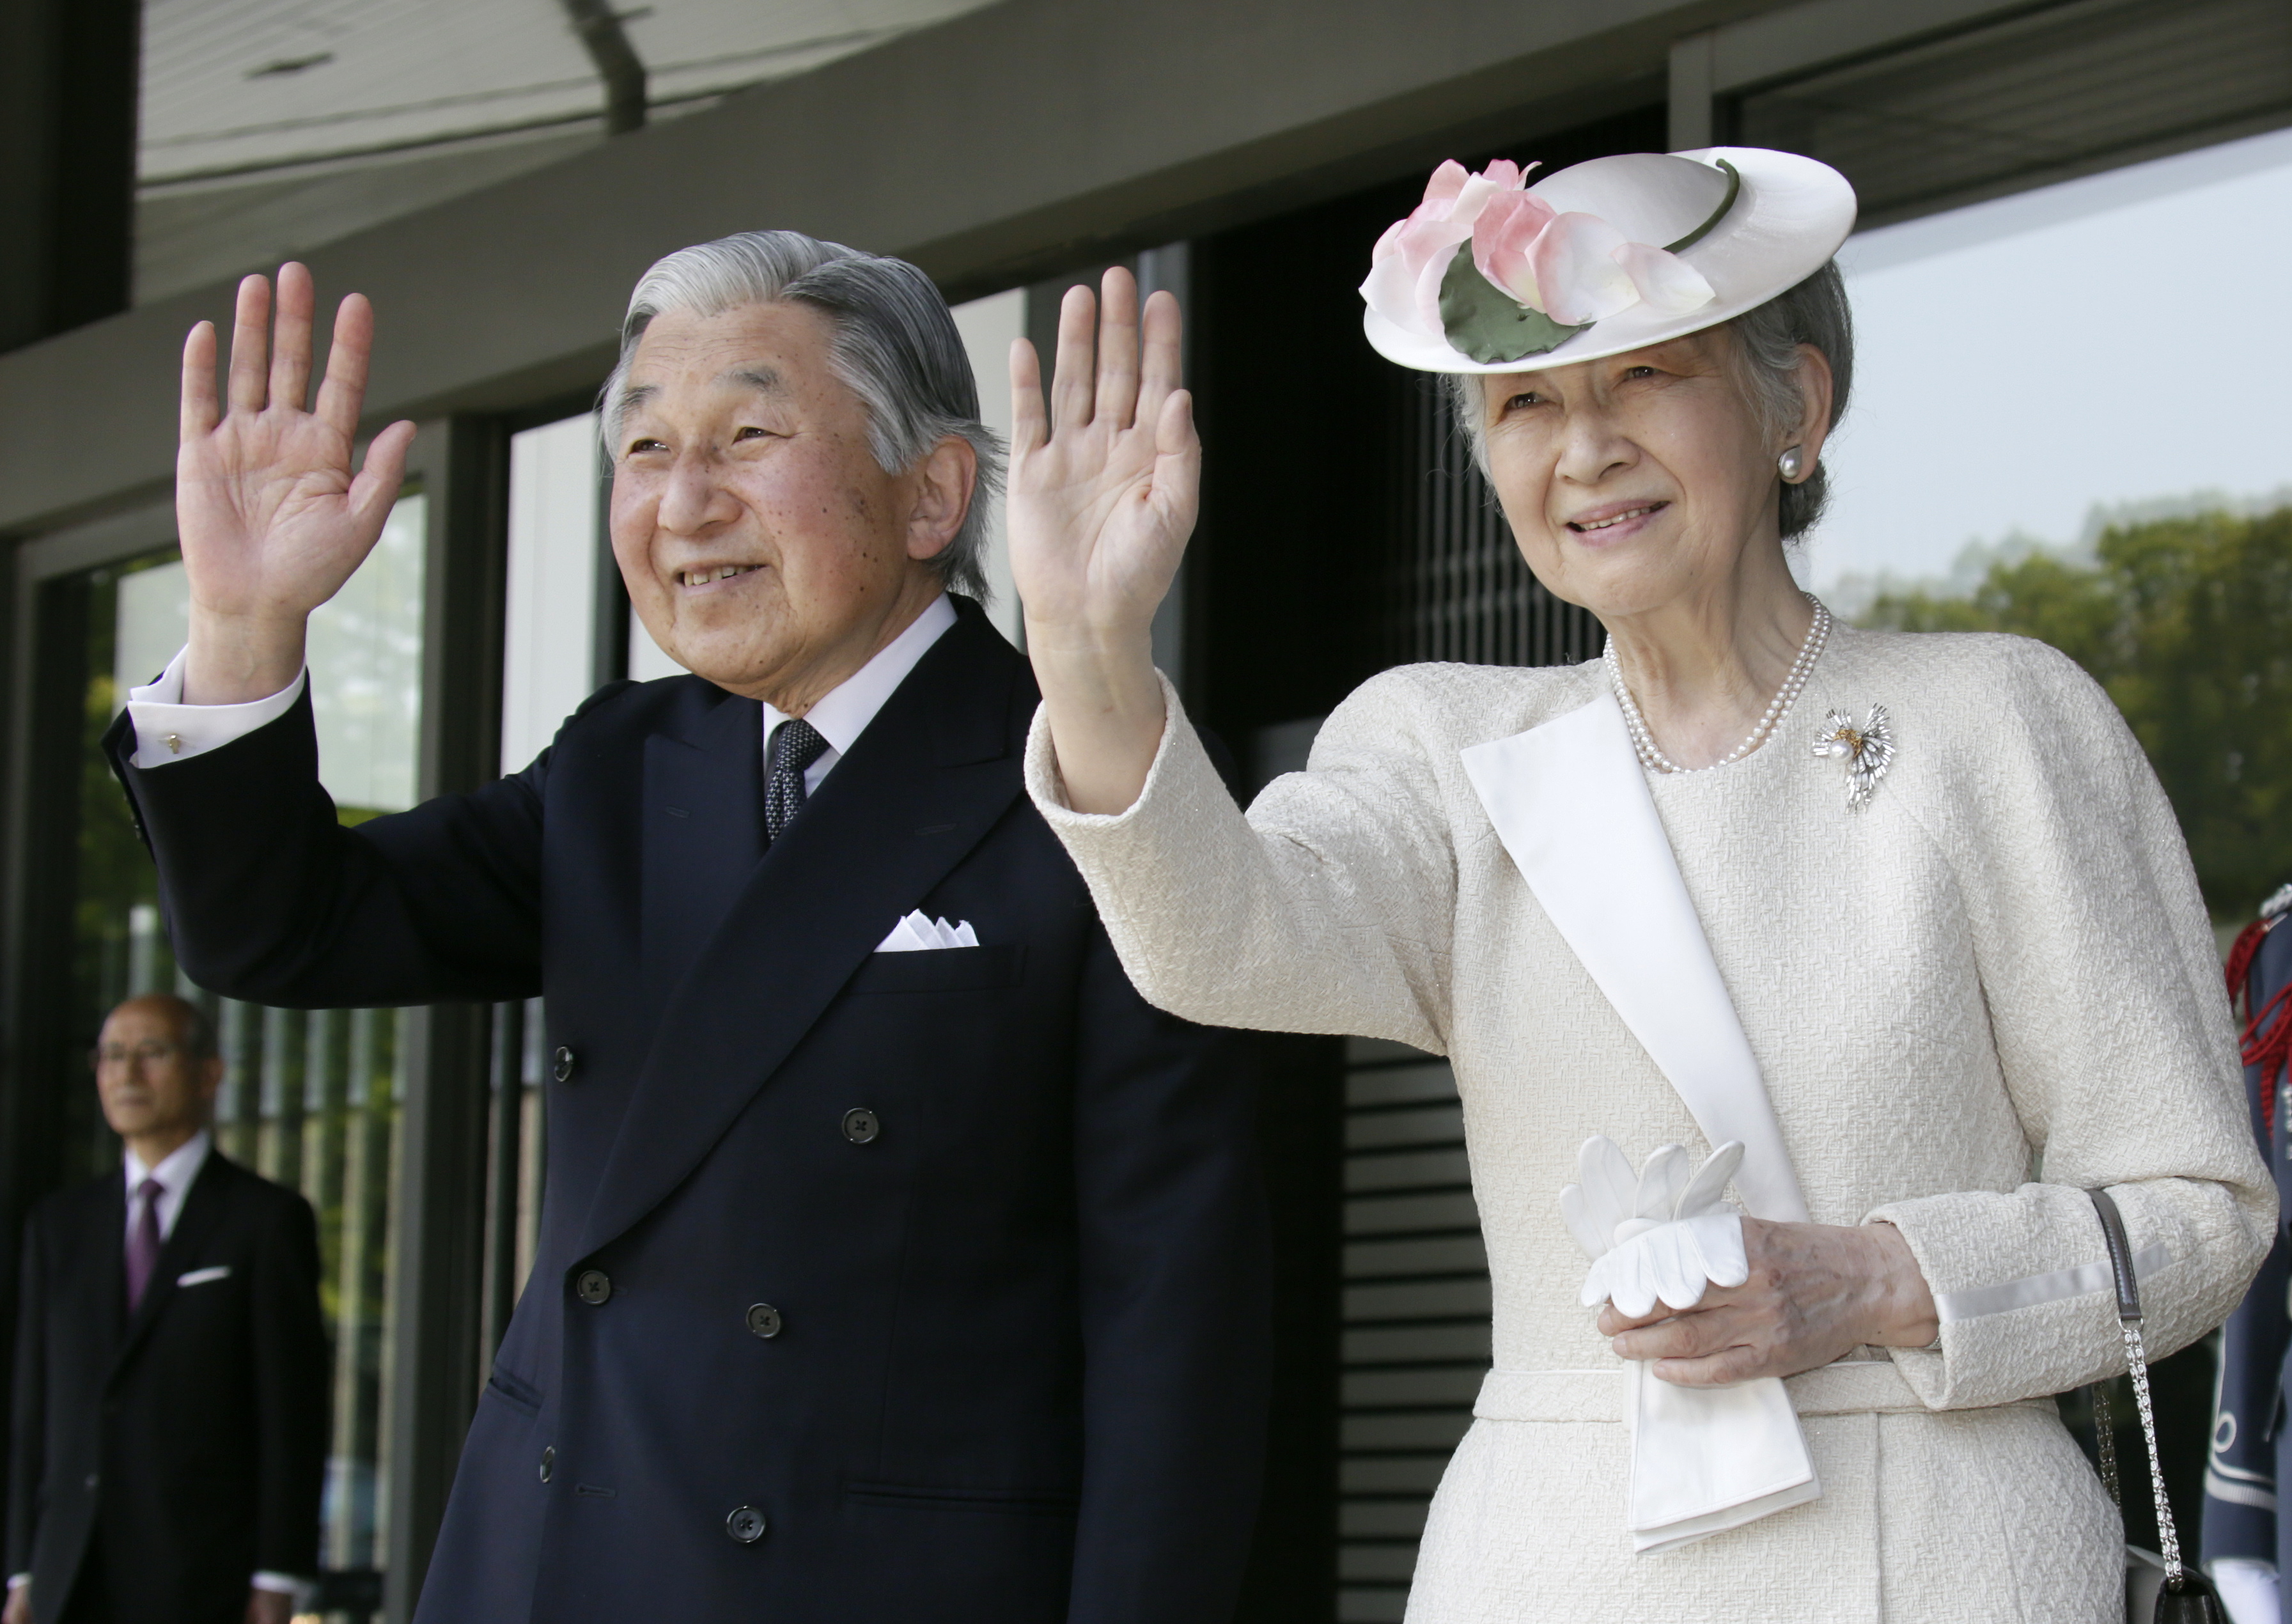 epa07530133 (FILE)A file photo dated 24 April 2014 shows Japan's Emperor Akihito and Emperss Michiko (R) wave to US President Barack Obama after the welcoming ceremony at the Imperial Palace in Tokyo, Japan. Emperor Akihito will abdicate on 30 April 2019 and Crown Prince Naruhito, first son of the Emperor and Empress will succeed Akihito and ascend the Chrysanthemum throne on 01 May 2019. It will be the first abdication by Japanese emperor in about two centuries.  EPA/KIMIMASA MAYAMA/POOL